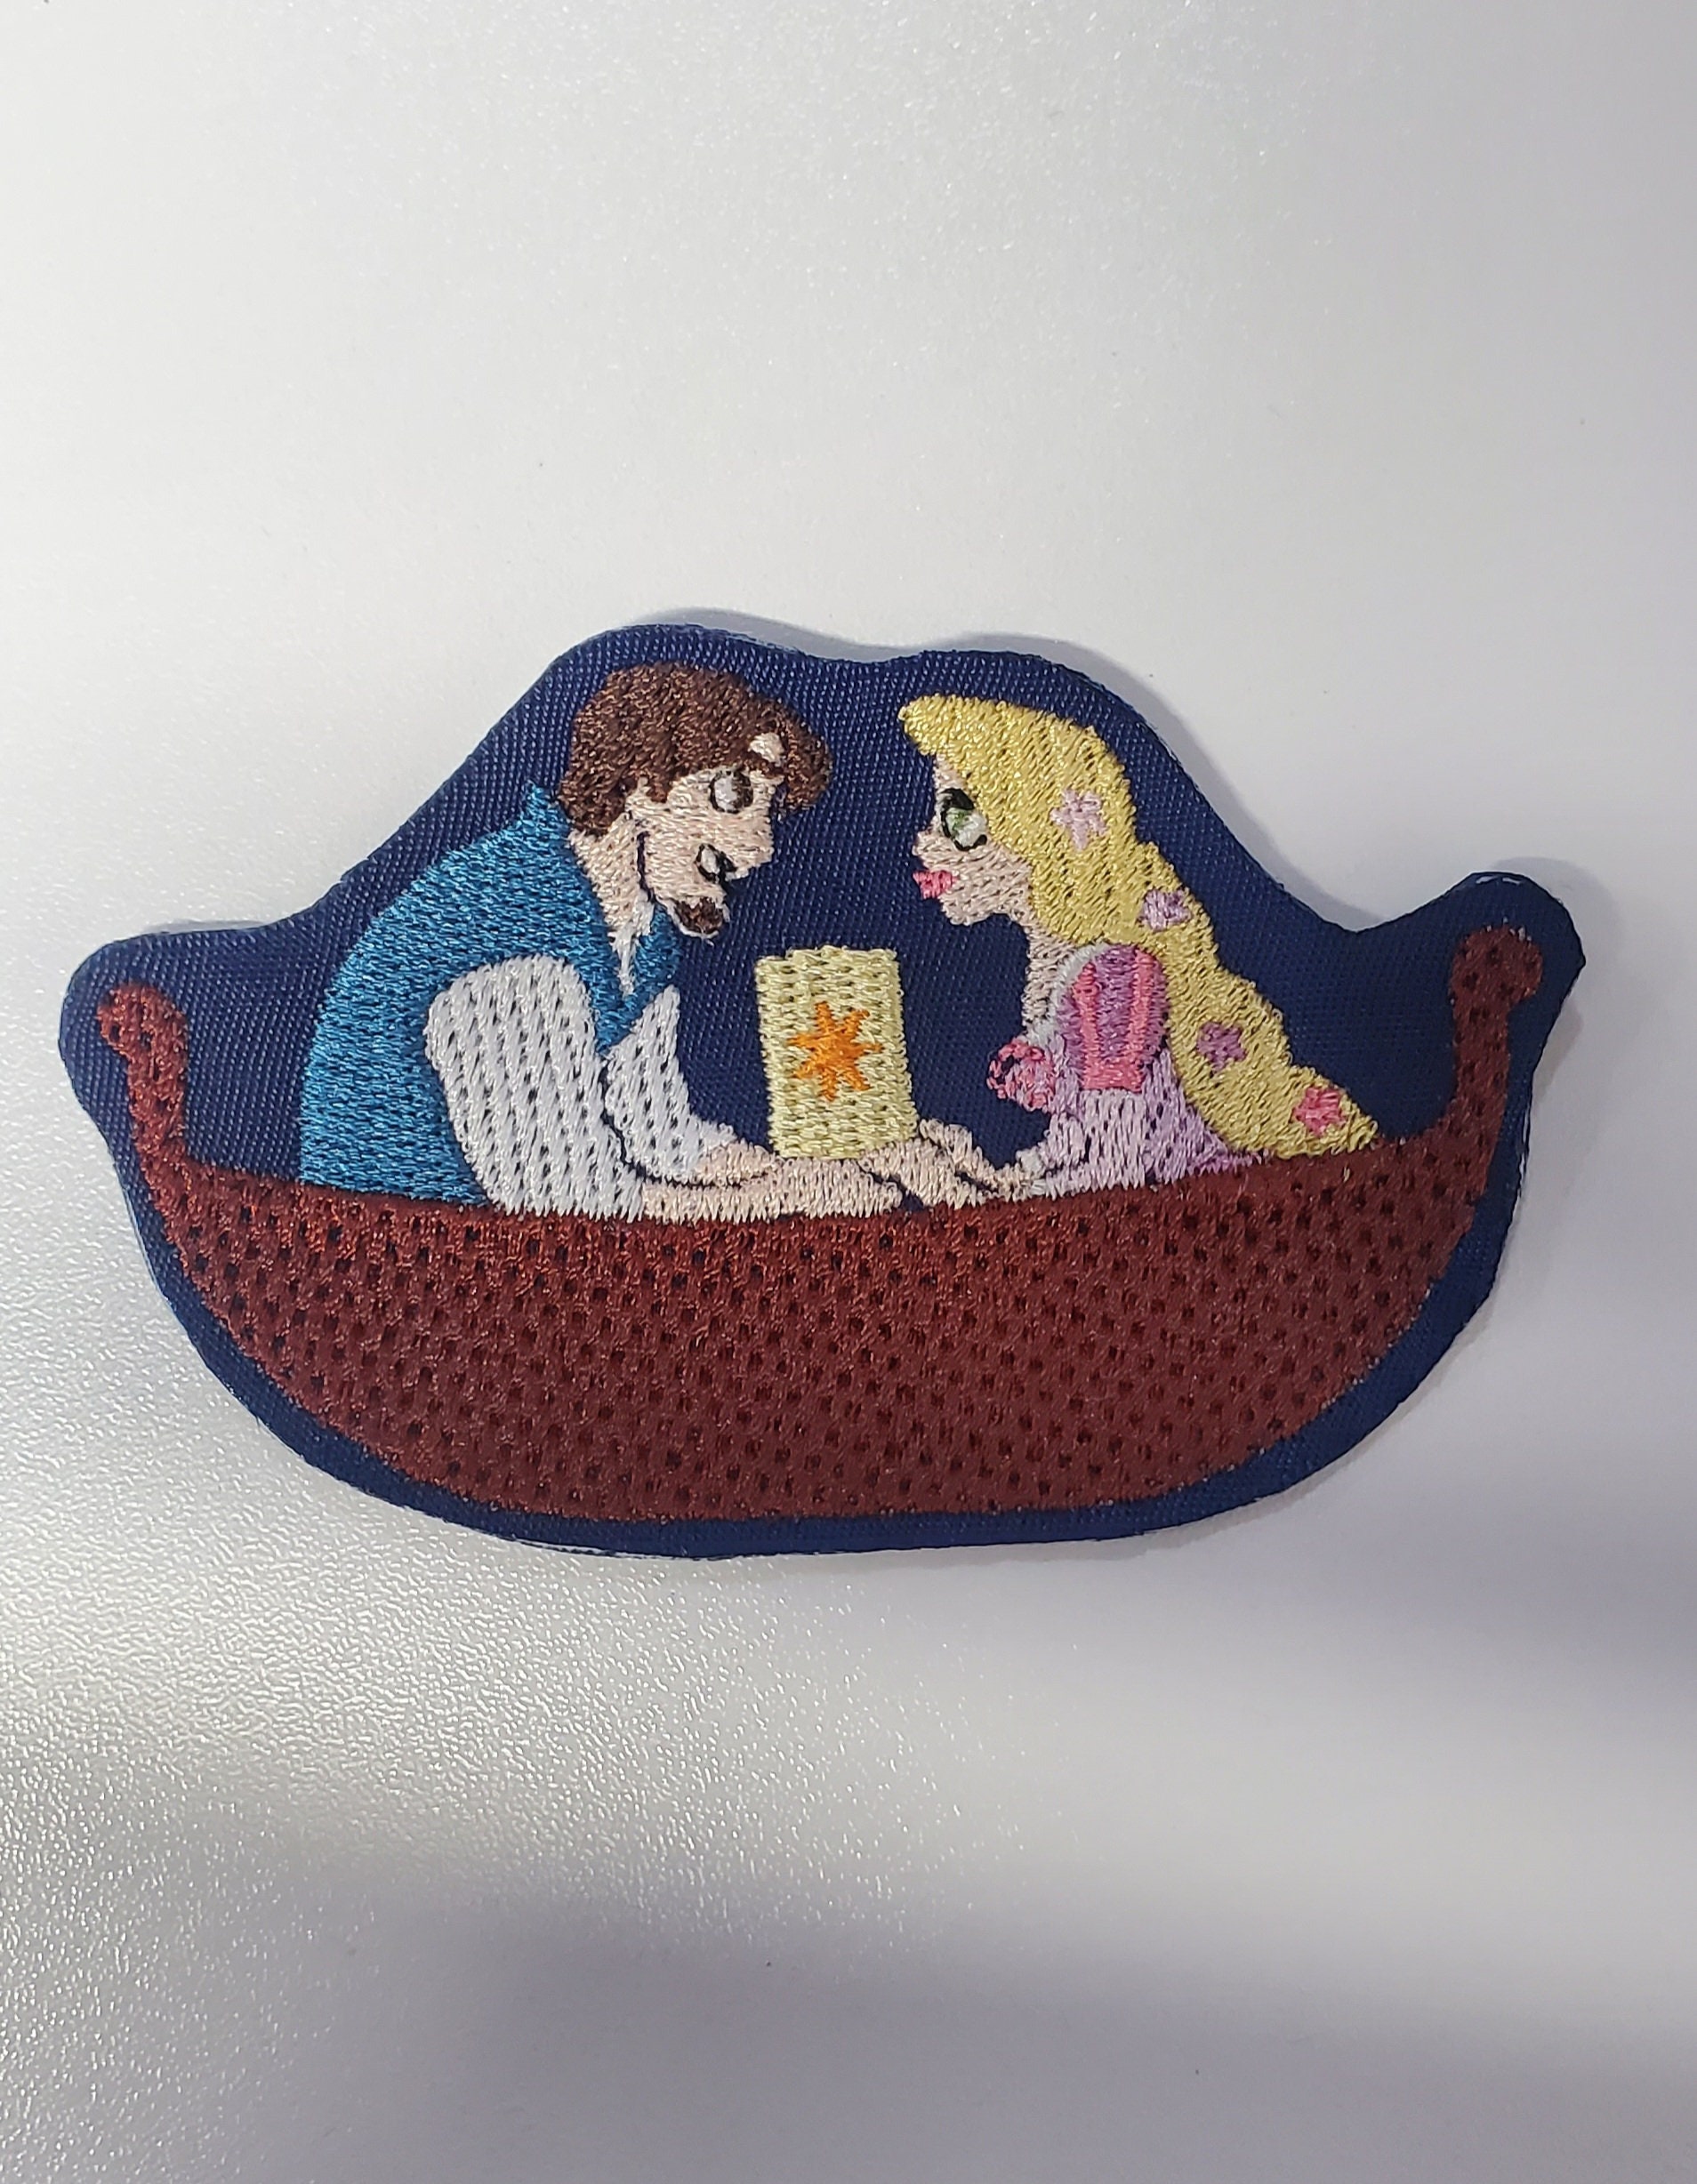 Disney Princess Group of 6 Patch Fairy Tale Movie Embroidered Iron on  Applique 